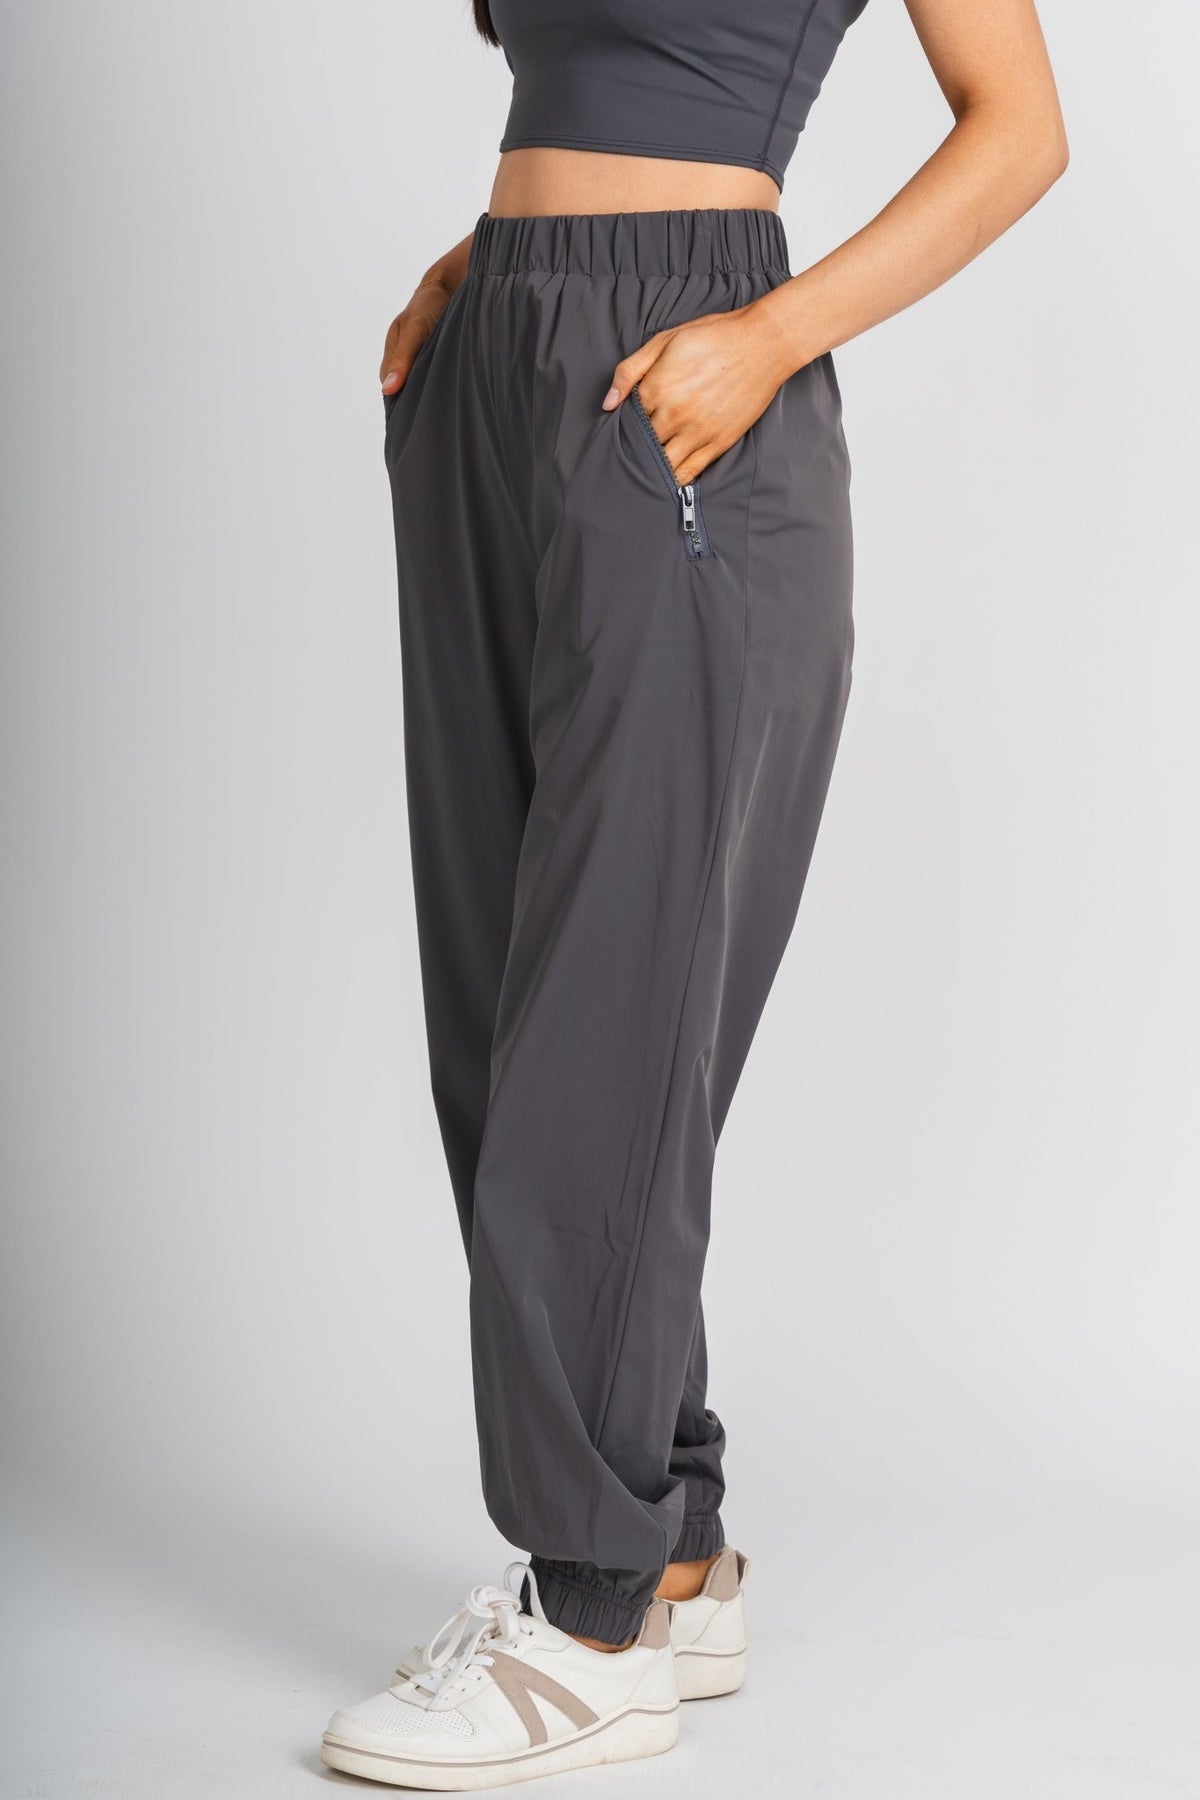 Nylon joggers charcoal - Trendy joggers - Cute Loungewear Collection at Lush Fashion Lounge Boutique in Oklahoma City